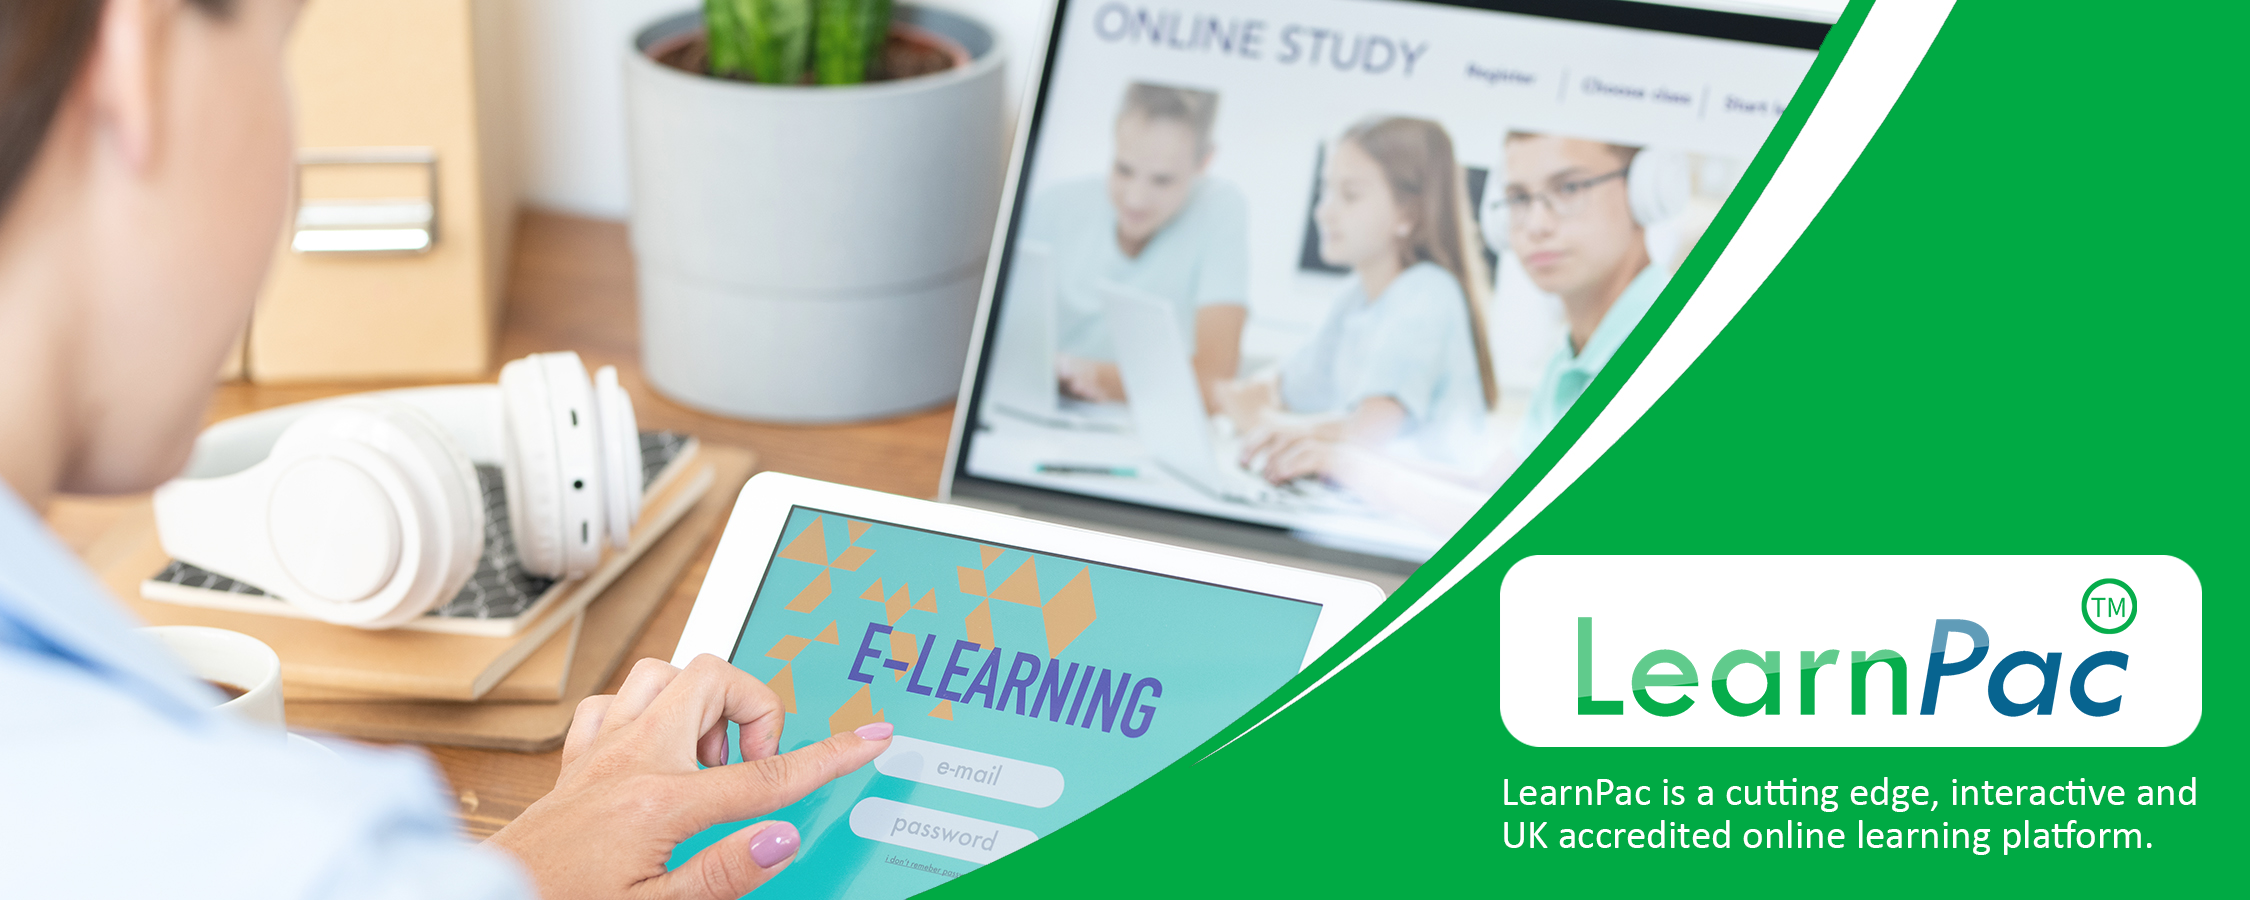 Early Years Resources and Nursery Supplies - Online Learning Courses - E-Learning Courses - LearnPac Systems UK -